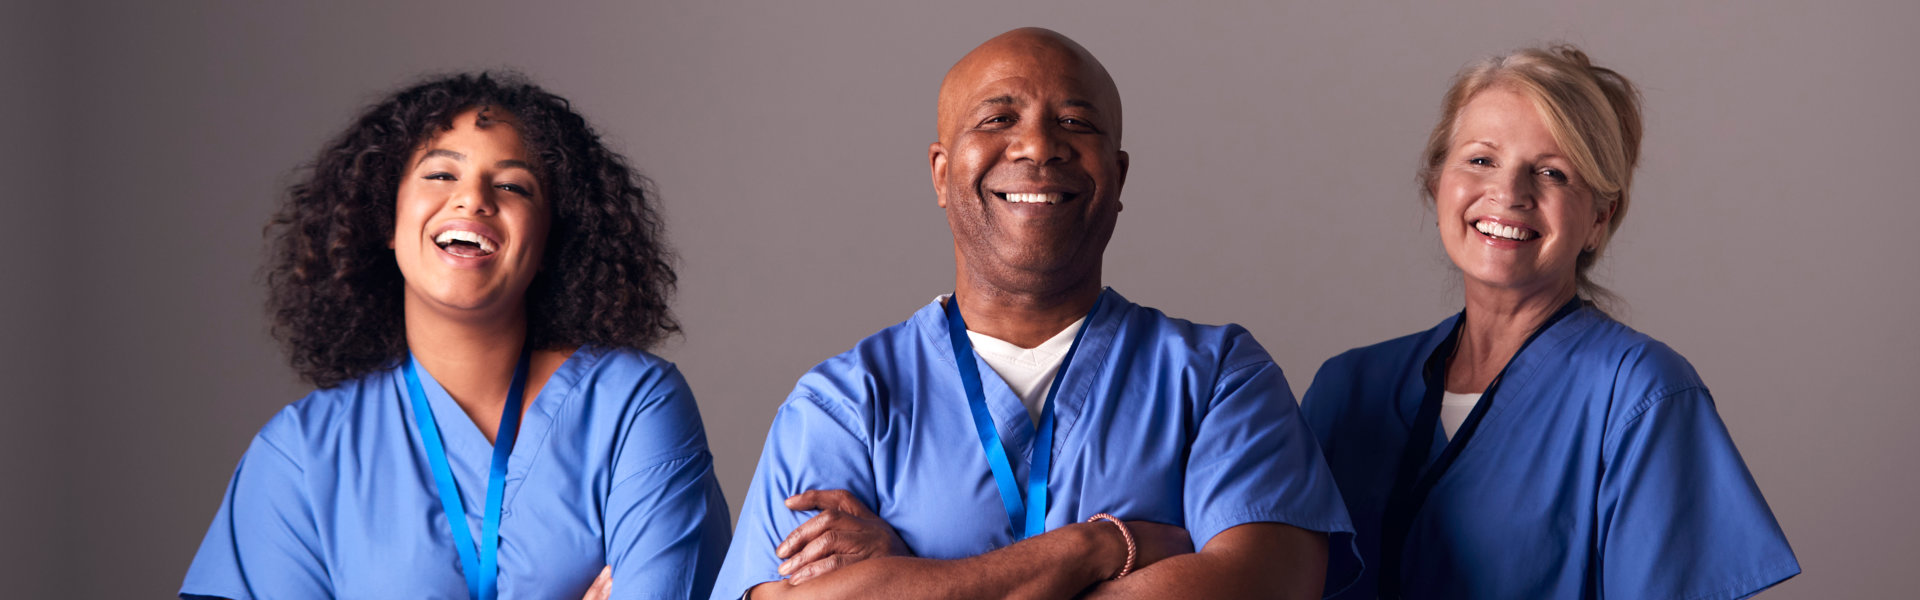 three healthcare workers smiling